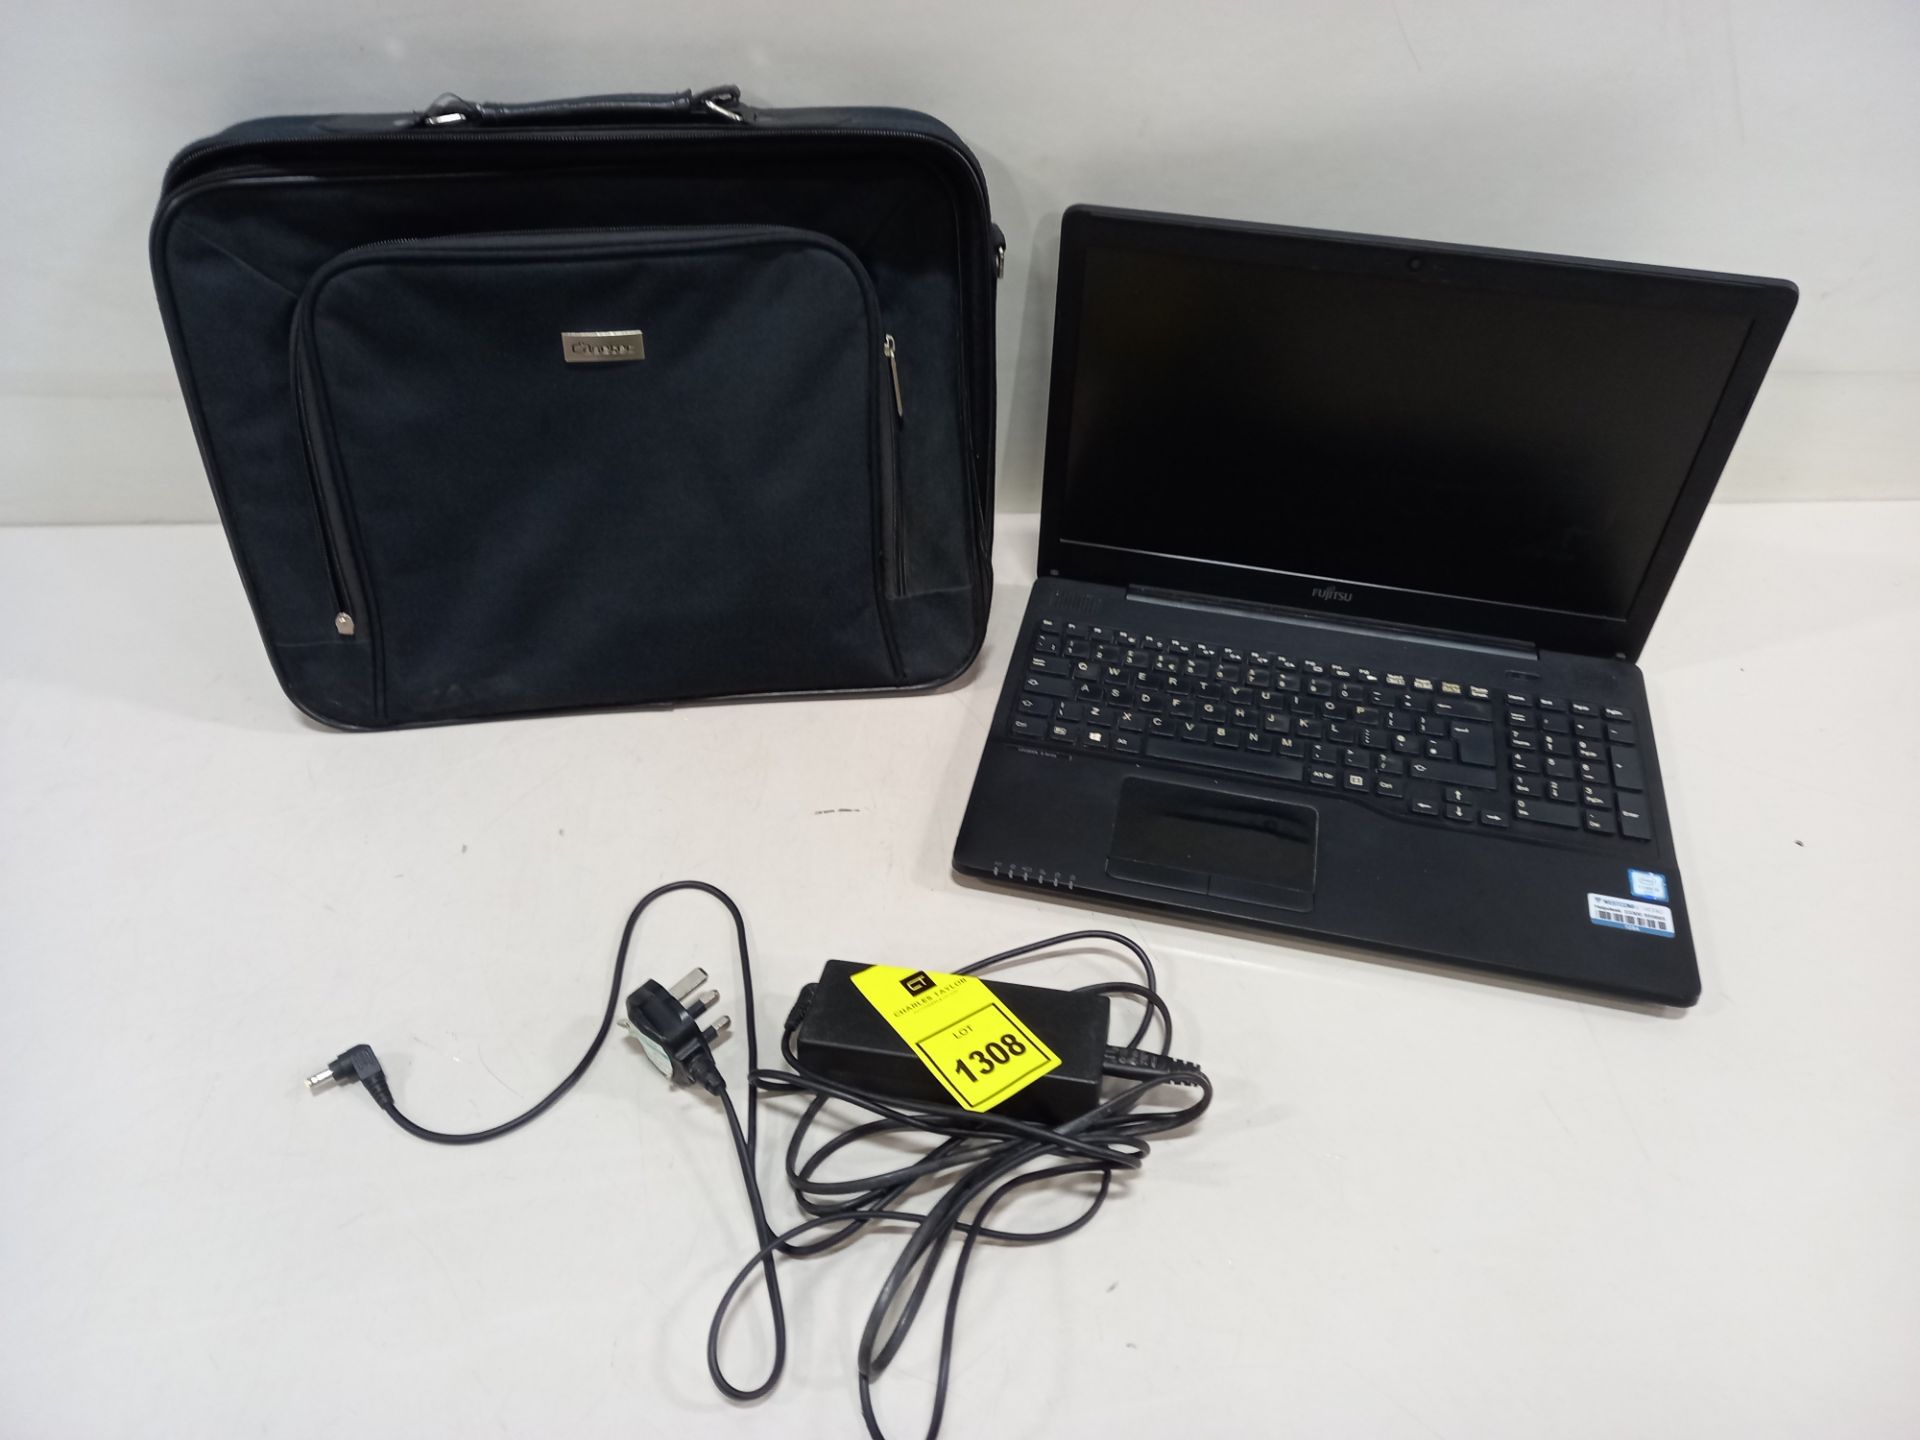 FUJITSU LIFE BOOK A SERIES LAPTOP INTEL CORE I5 DATA WIPED - NO O/S - WITH CHARGER AND CARRY CASE